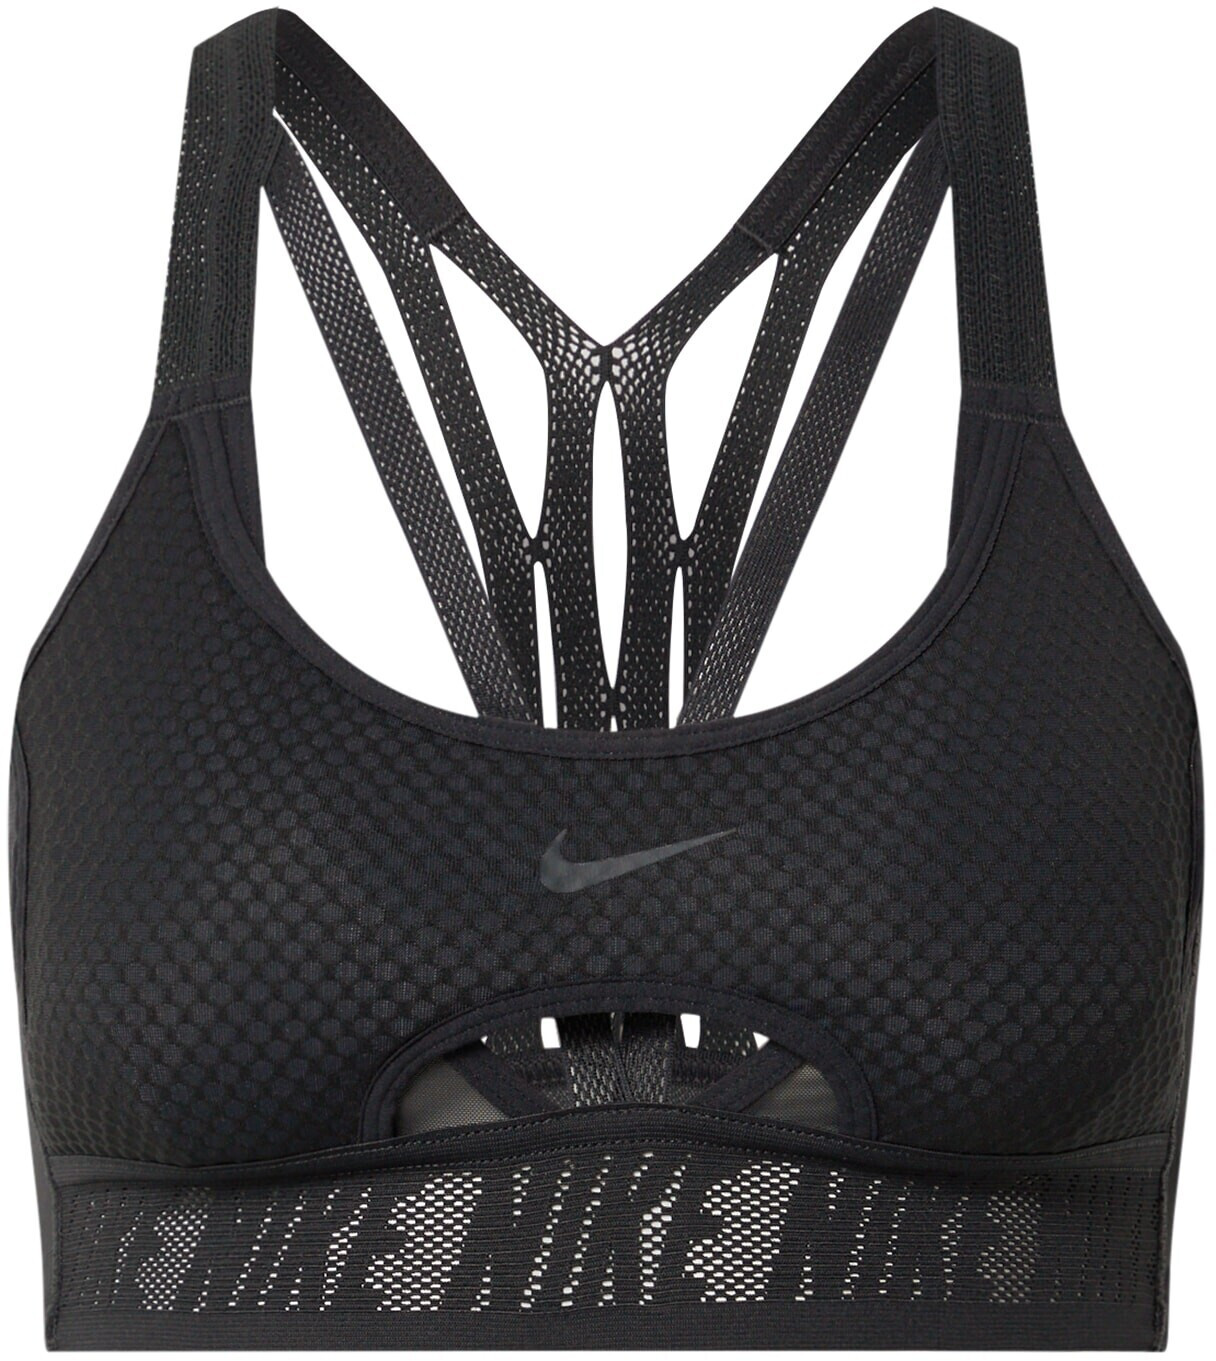 Nike Training Indy light support sports bra in gray